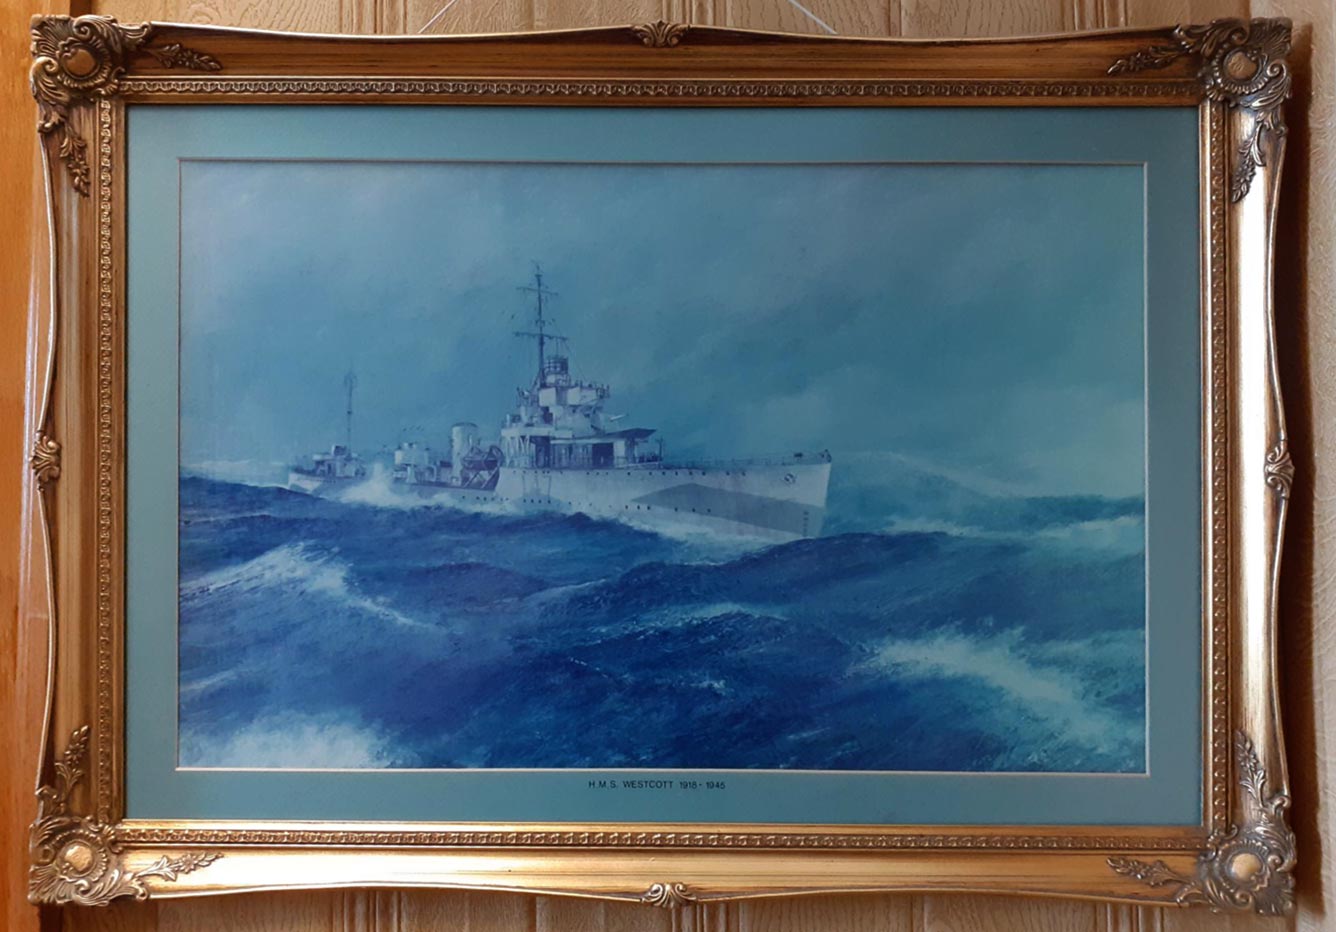 The painting by Les Lawrence of HMS WEstcott which hasngs in the Msyor's Parlour of the Town Hall in Morecambe and the Village Hall at Westciott near Dorking, Surrey.